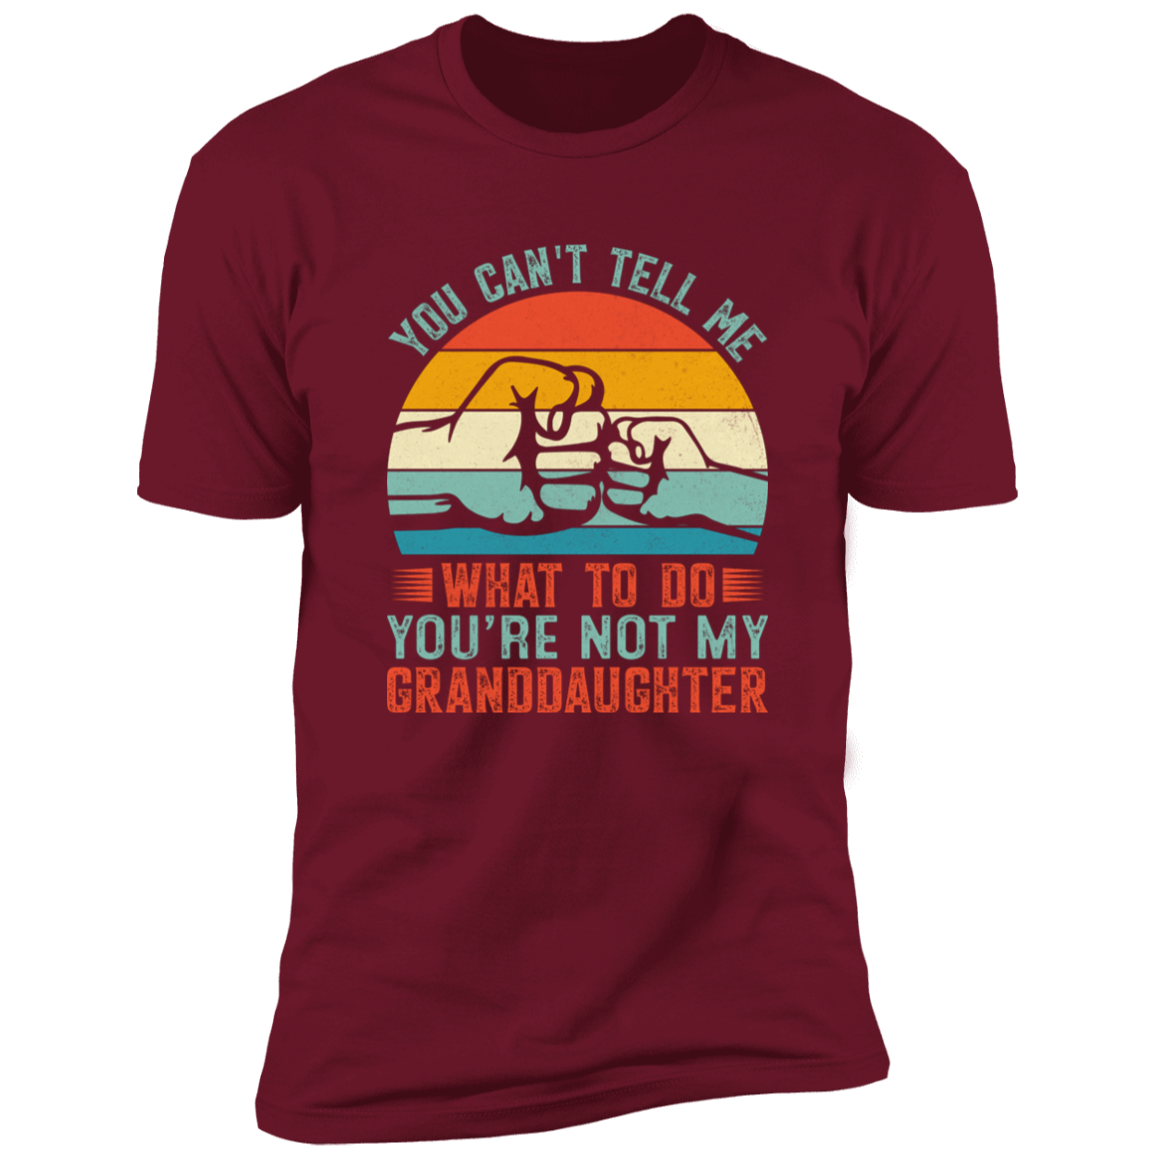 You Can't Tell Me What To Do Granddaughter Retro T-Shirt